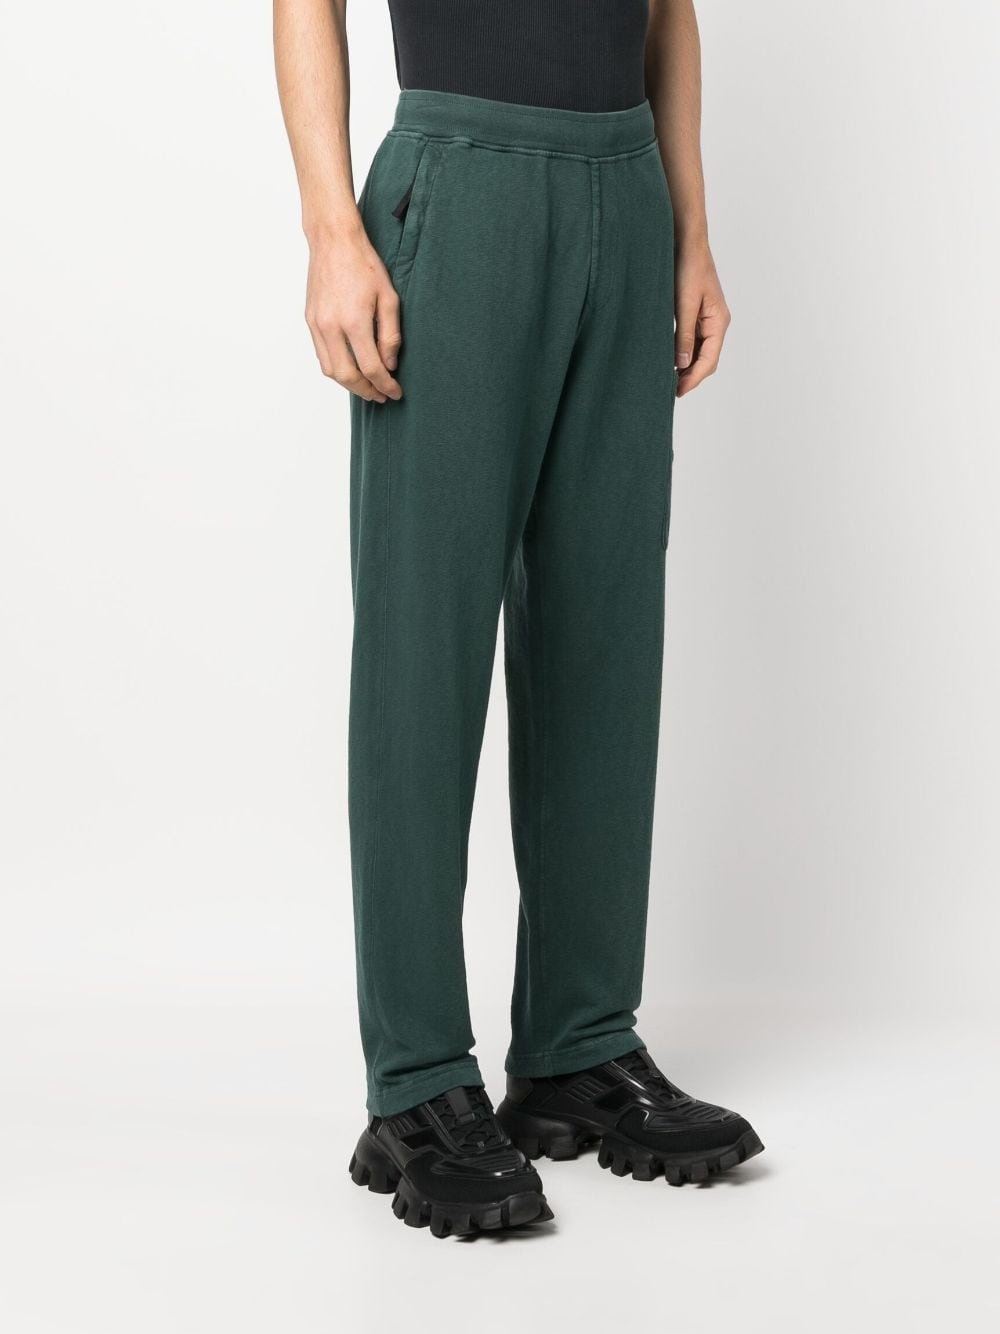 Compass patch track pants - 3